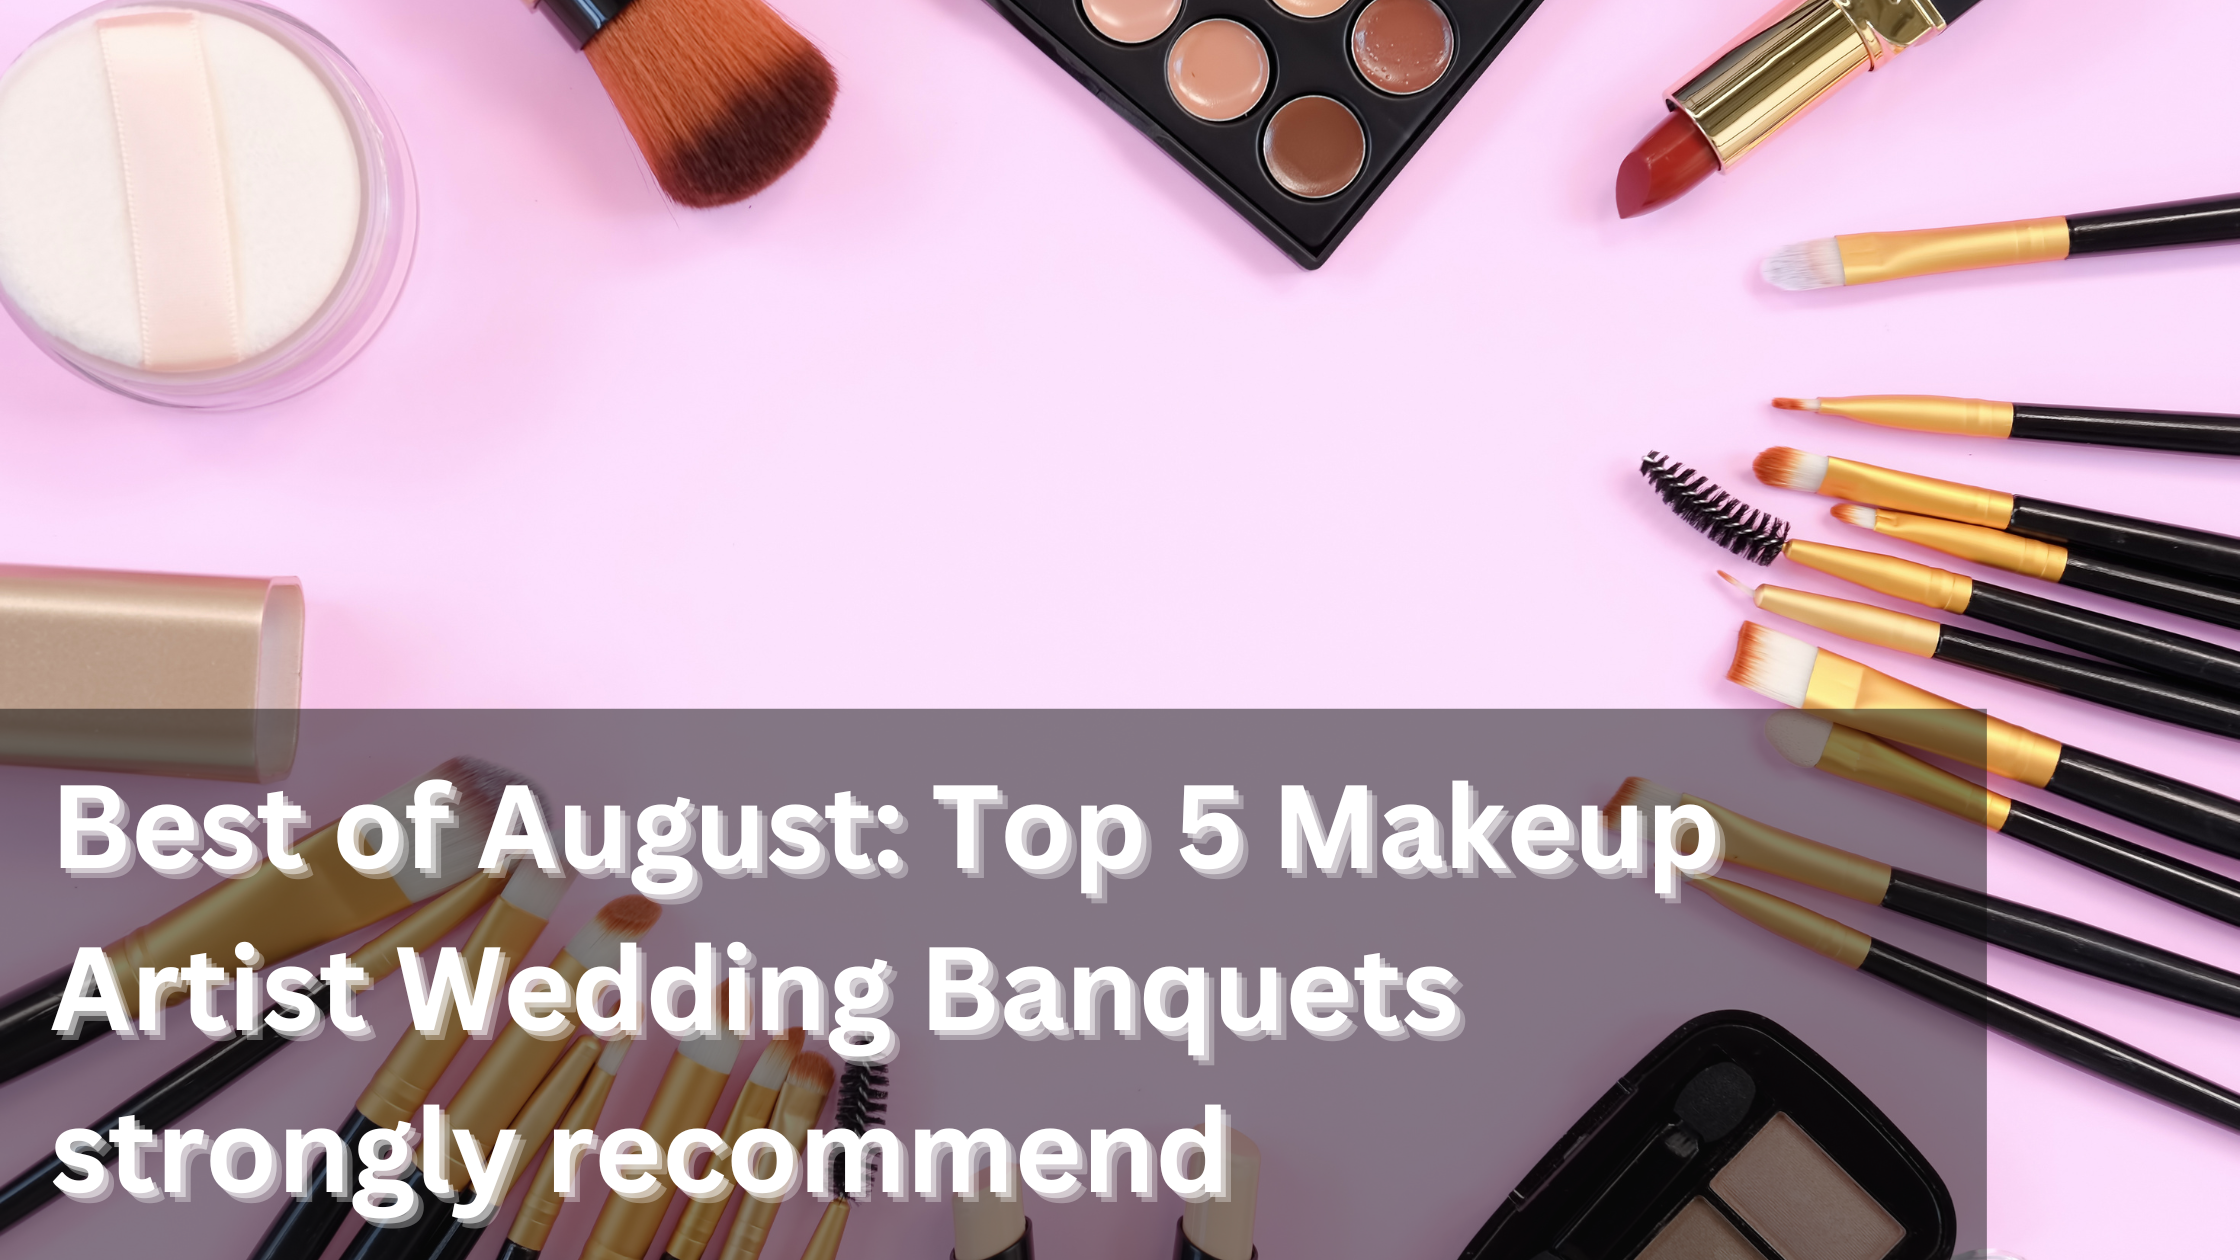 Best of August: Top 5 Makeup Artist Wedding Banquets strongly recommend